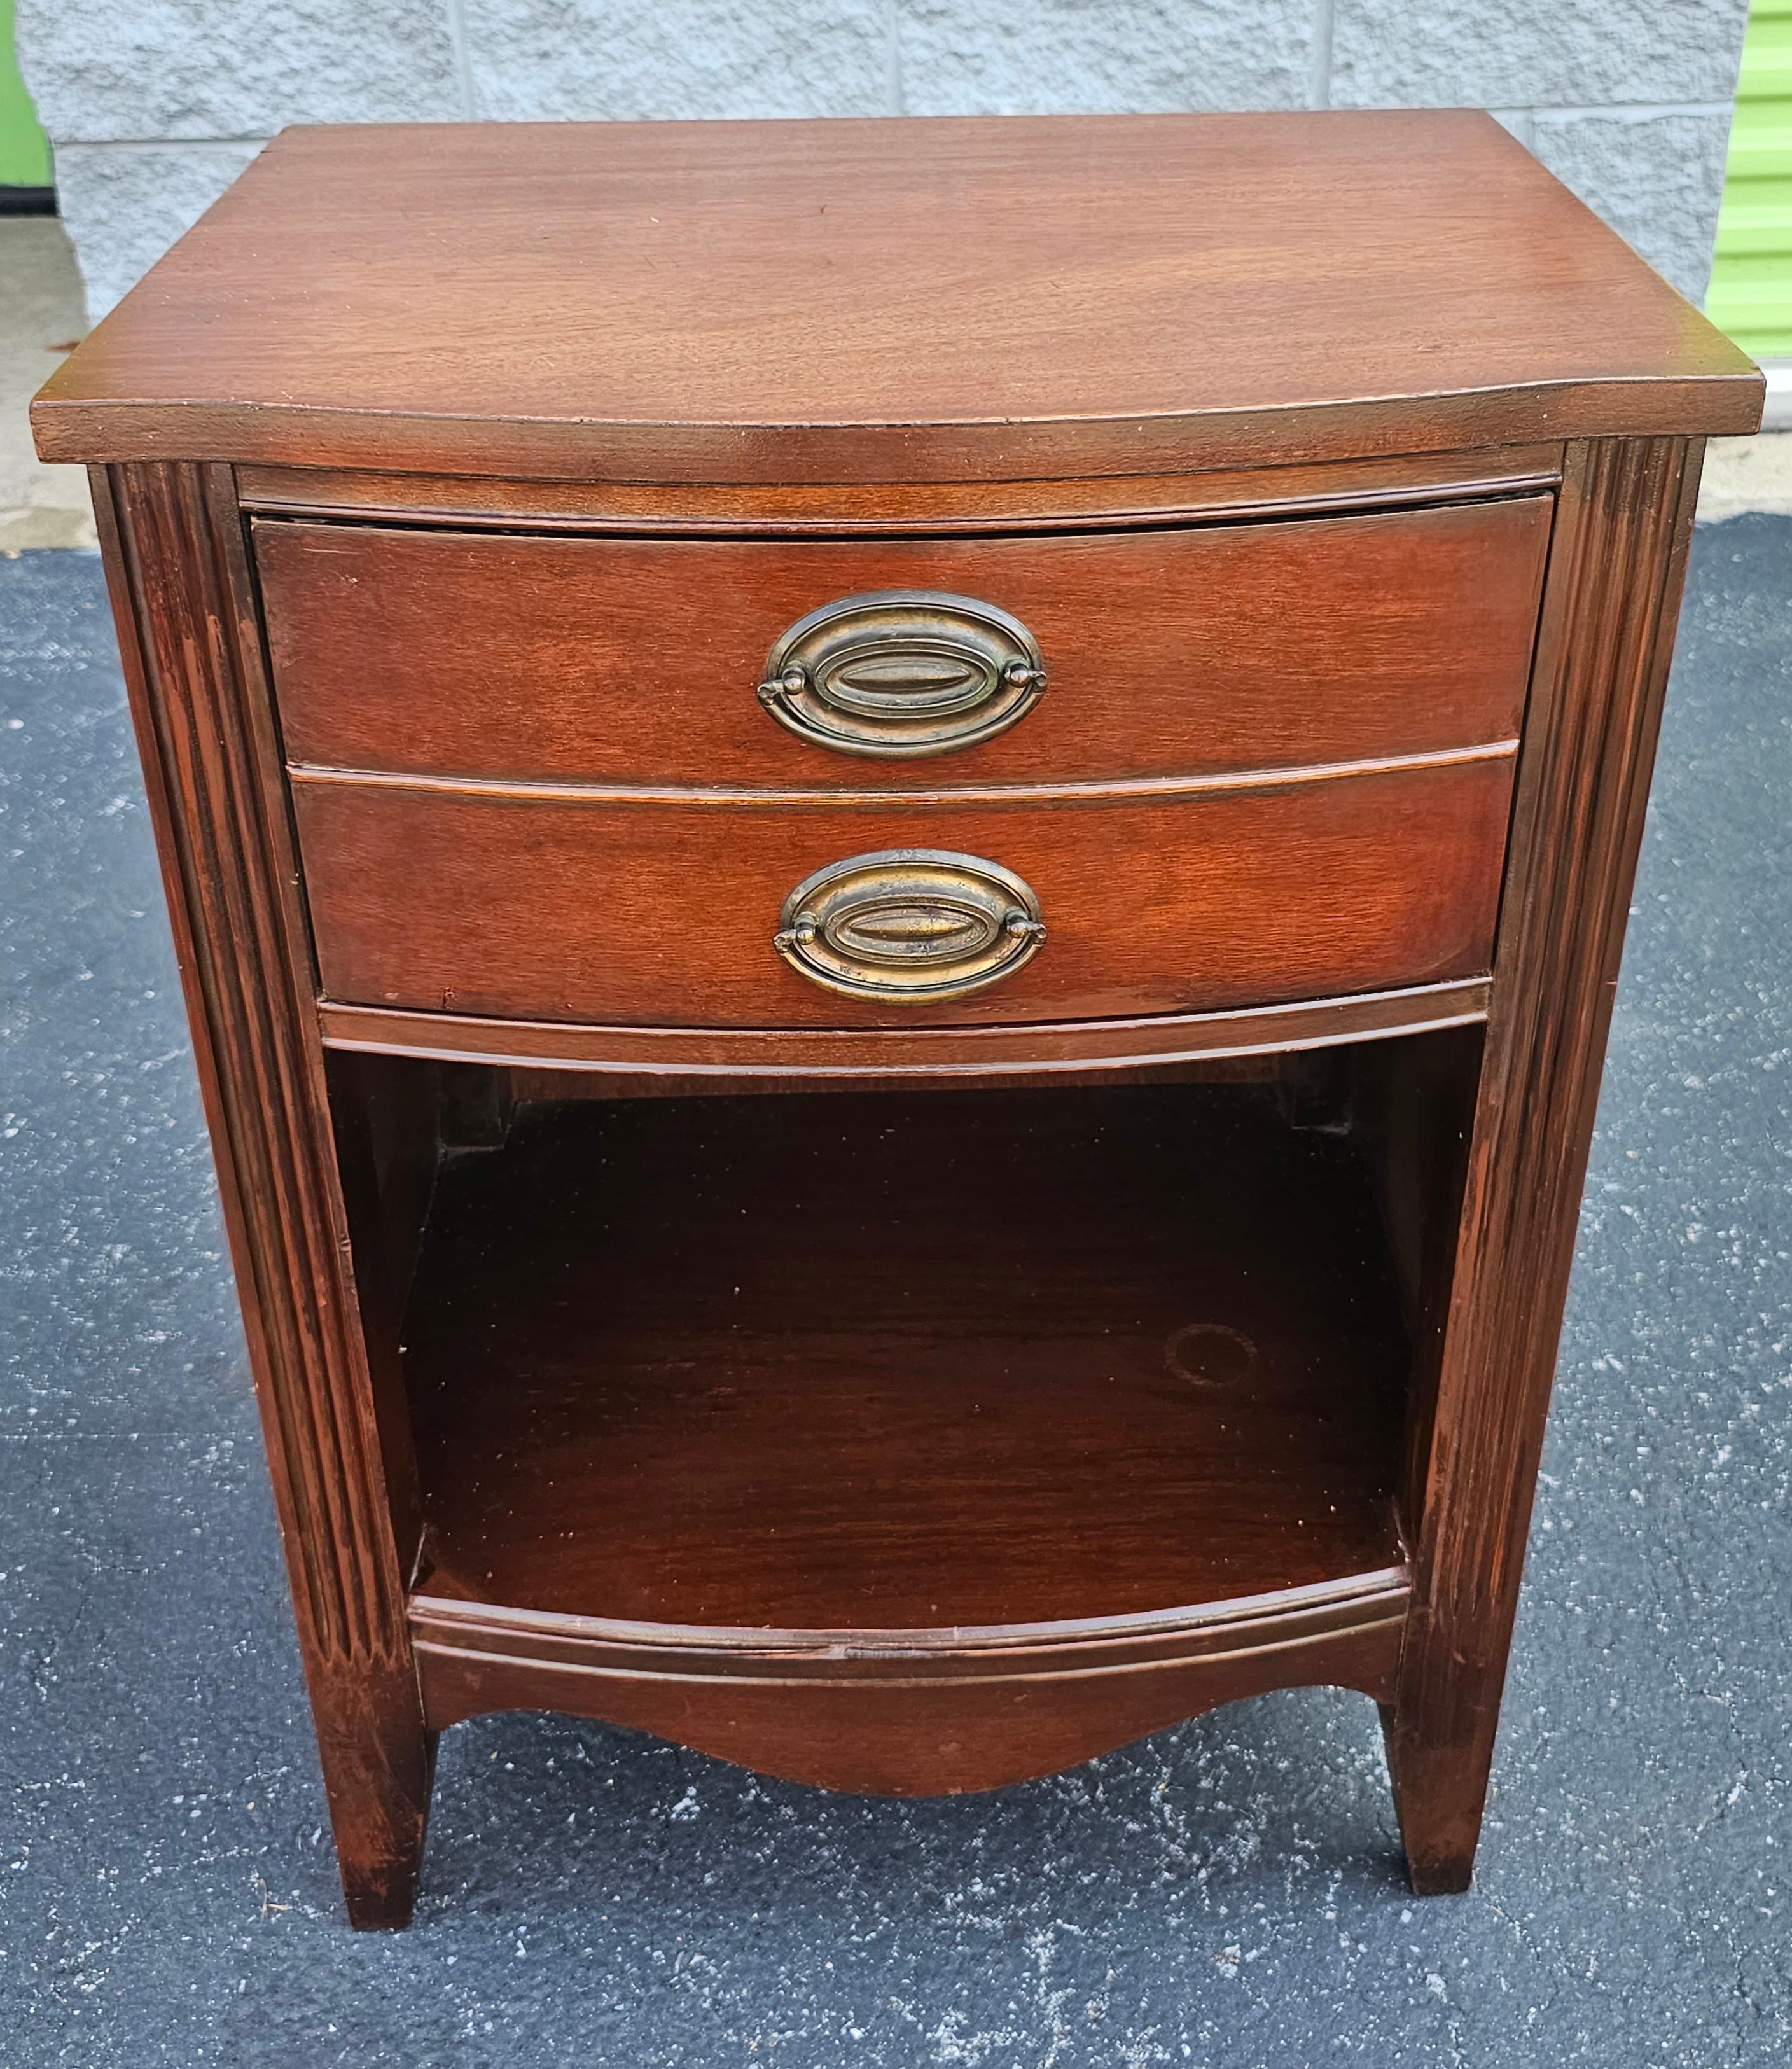 Early 20th Century Federal Style Mahogany Single large Drawer Nightstand measuring 20